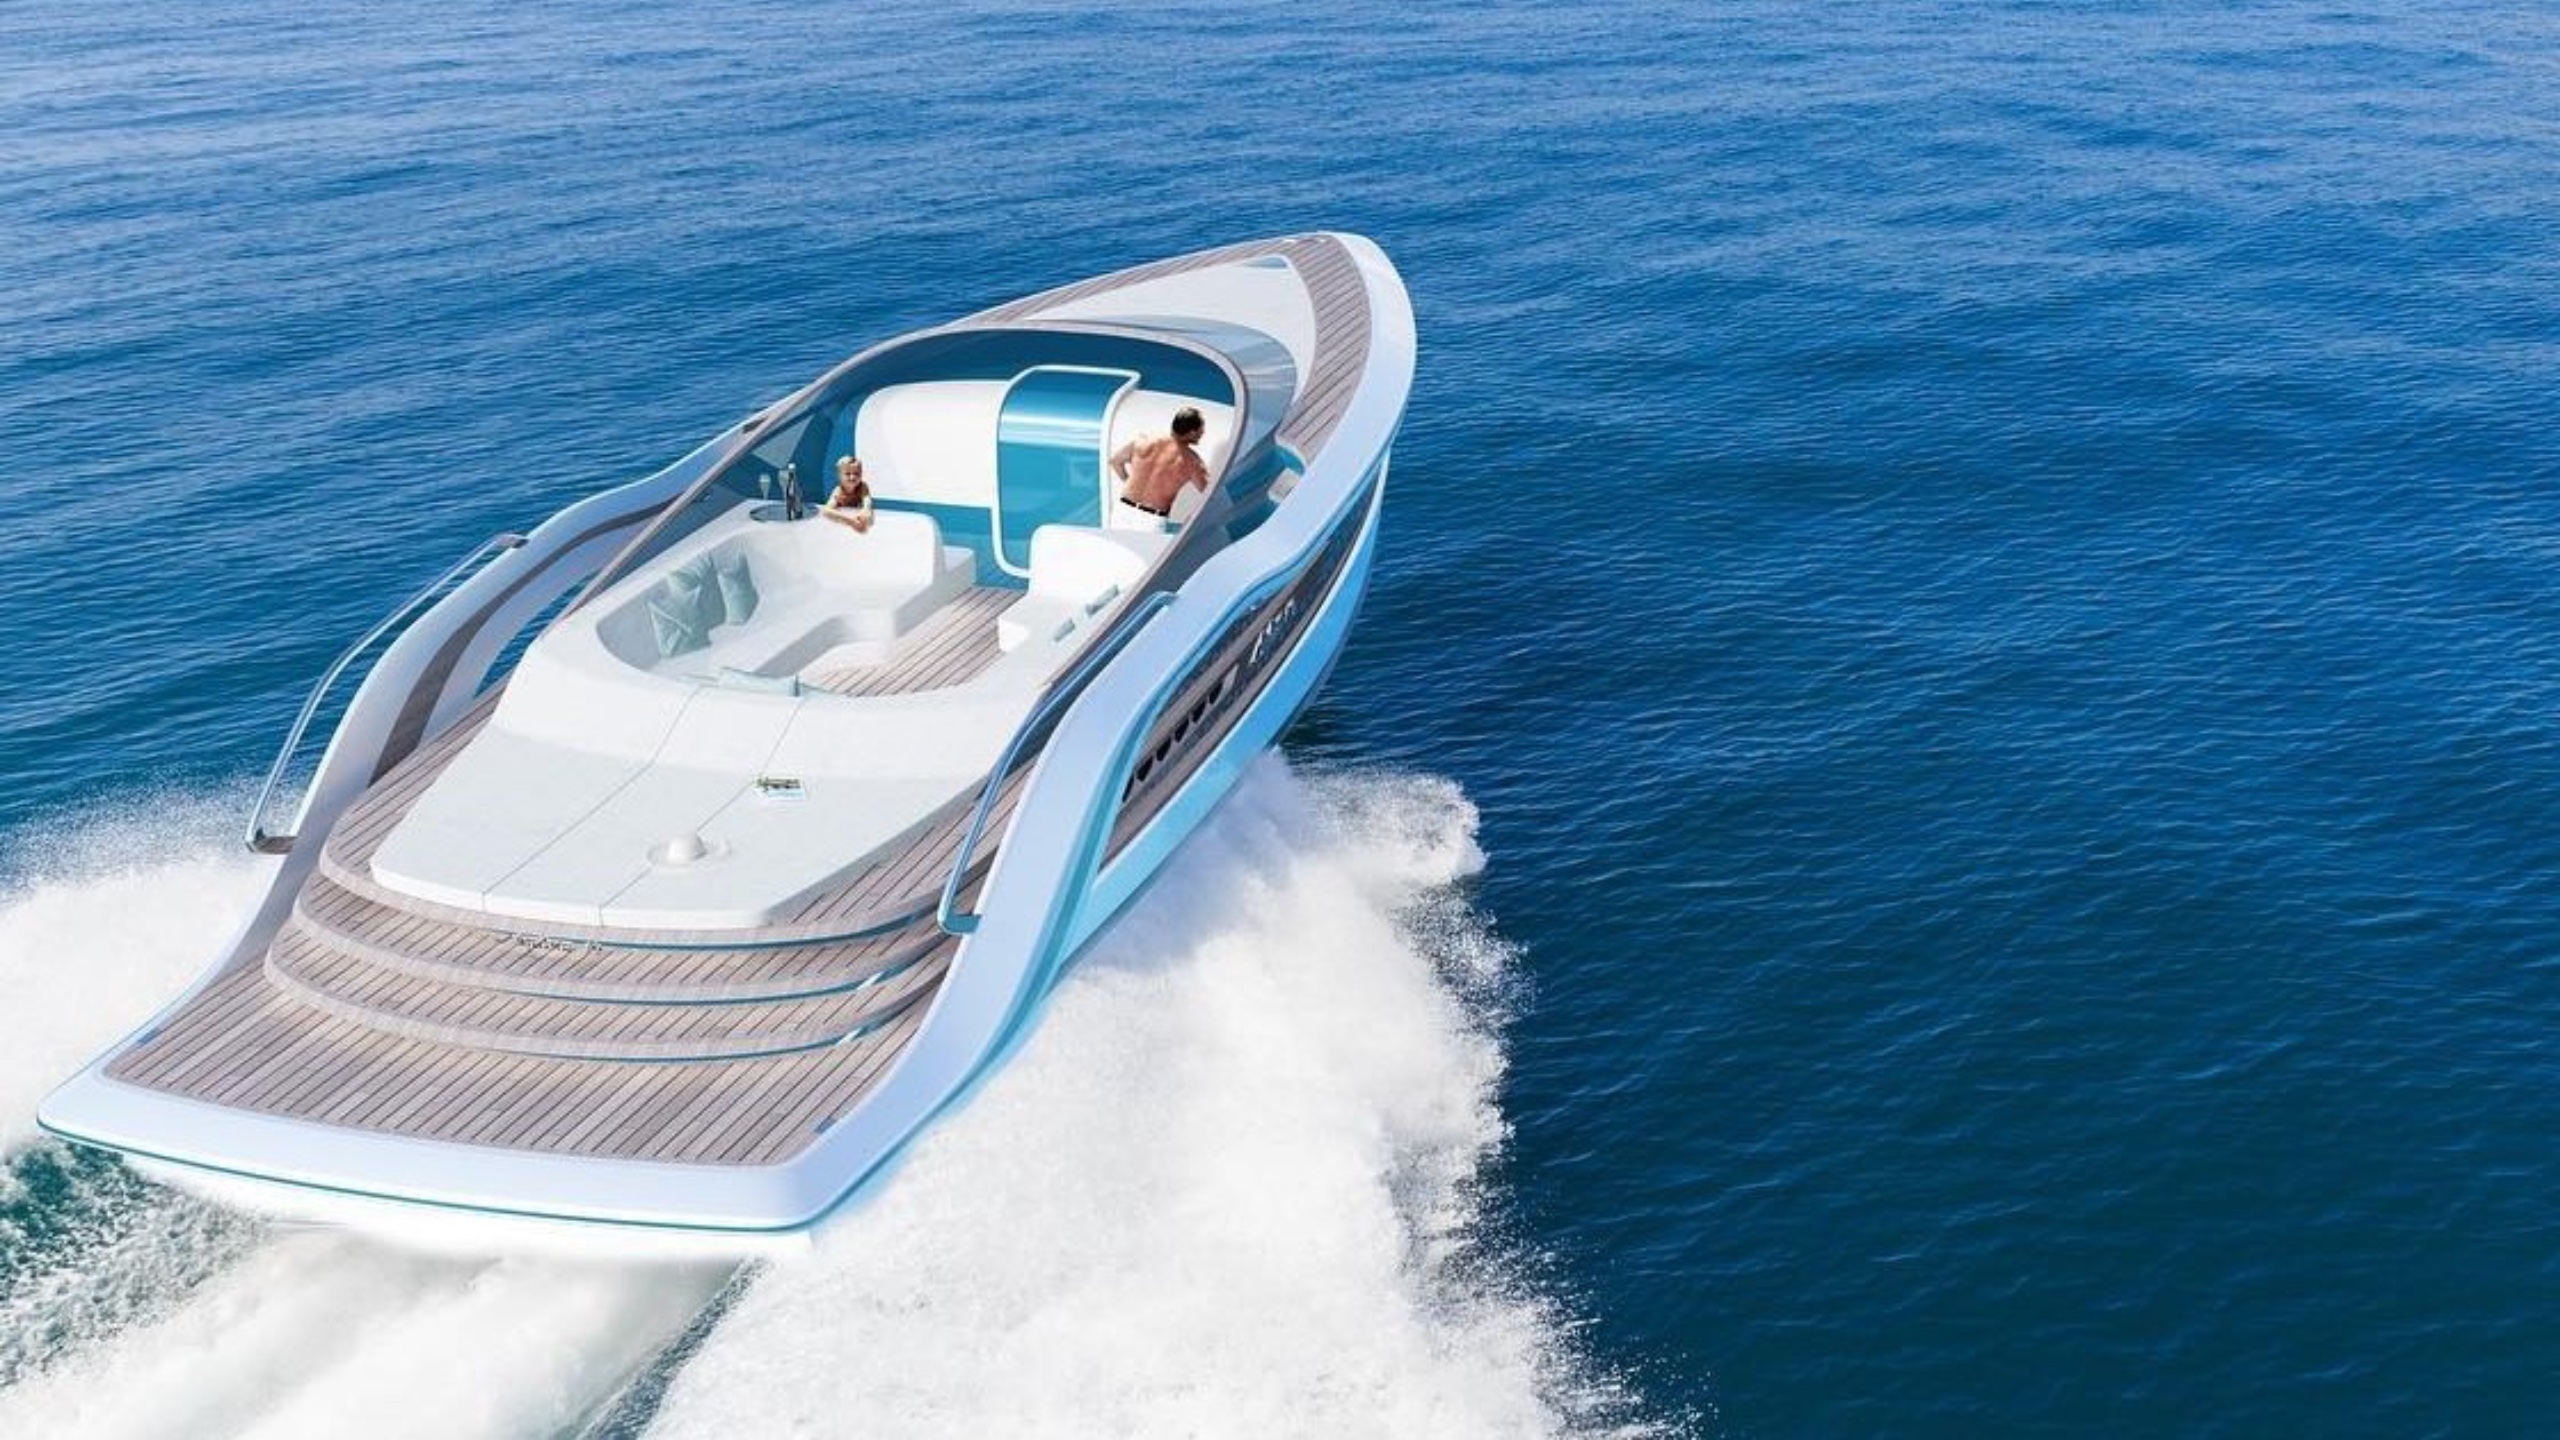 Andy Waugh's Skyline 14 Superyacht Concept Aims at the Metaverse